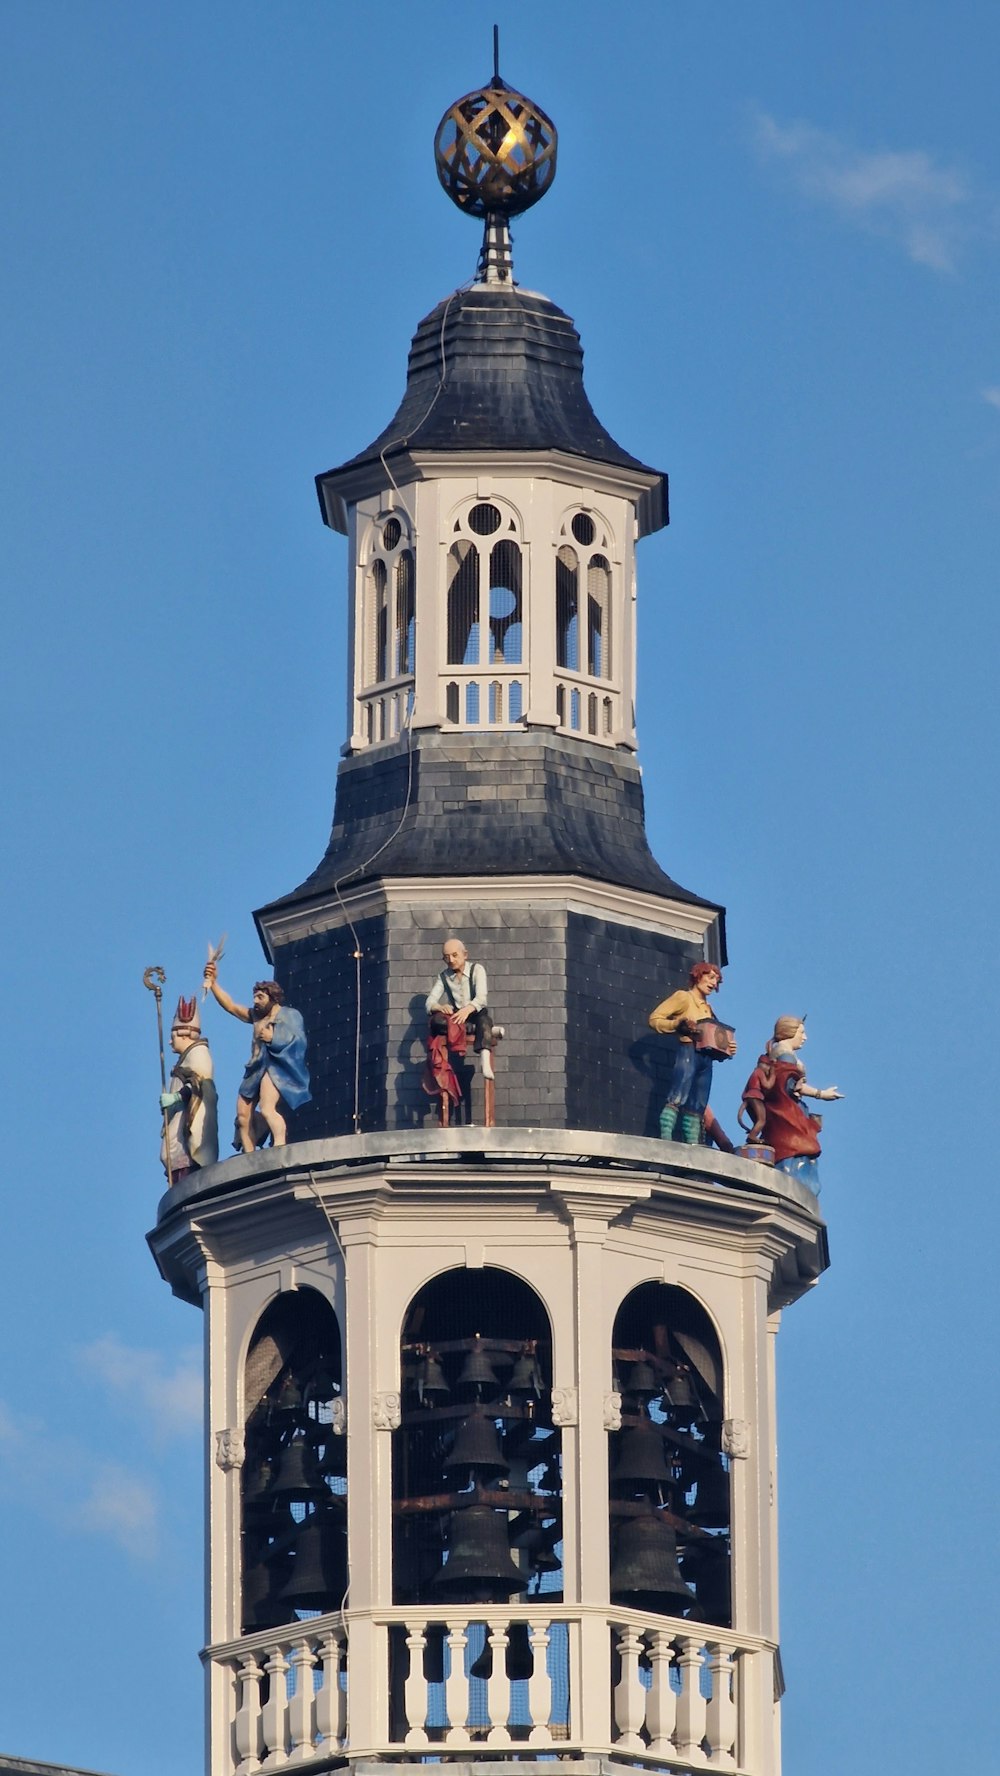 a clock tower with statues on top of it